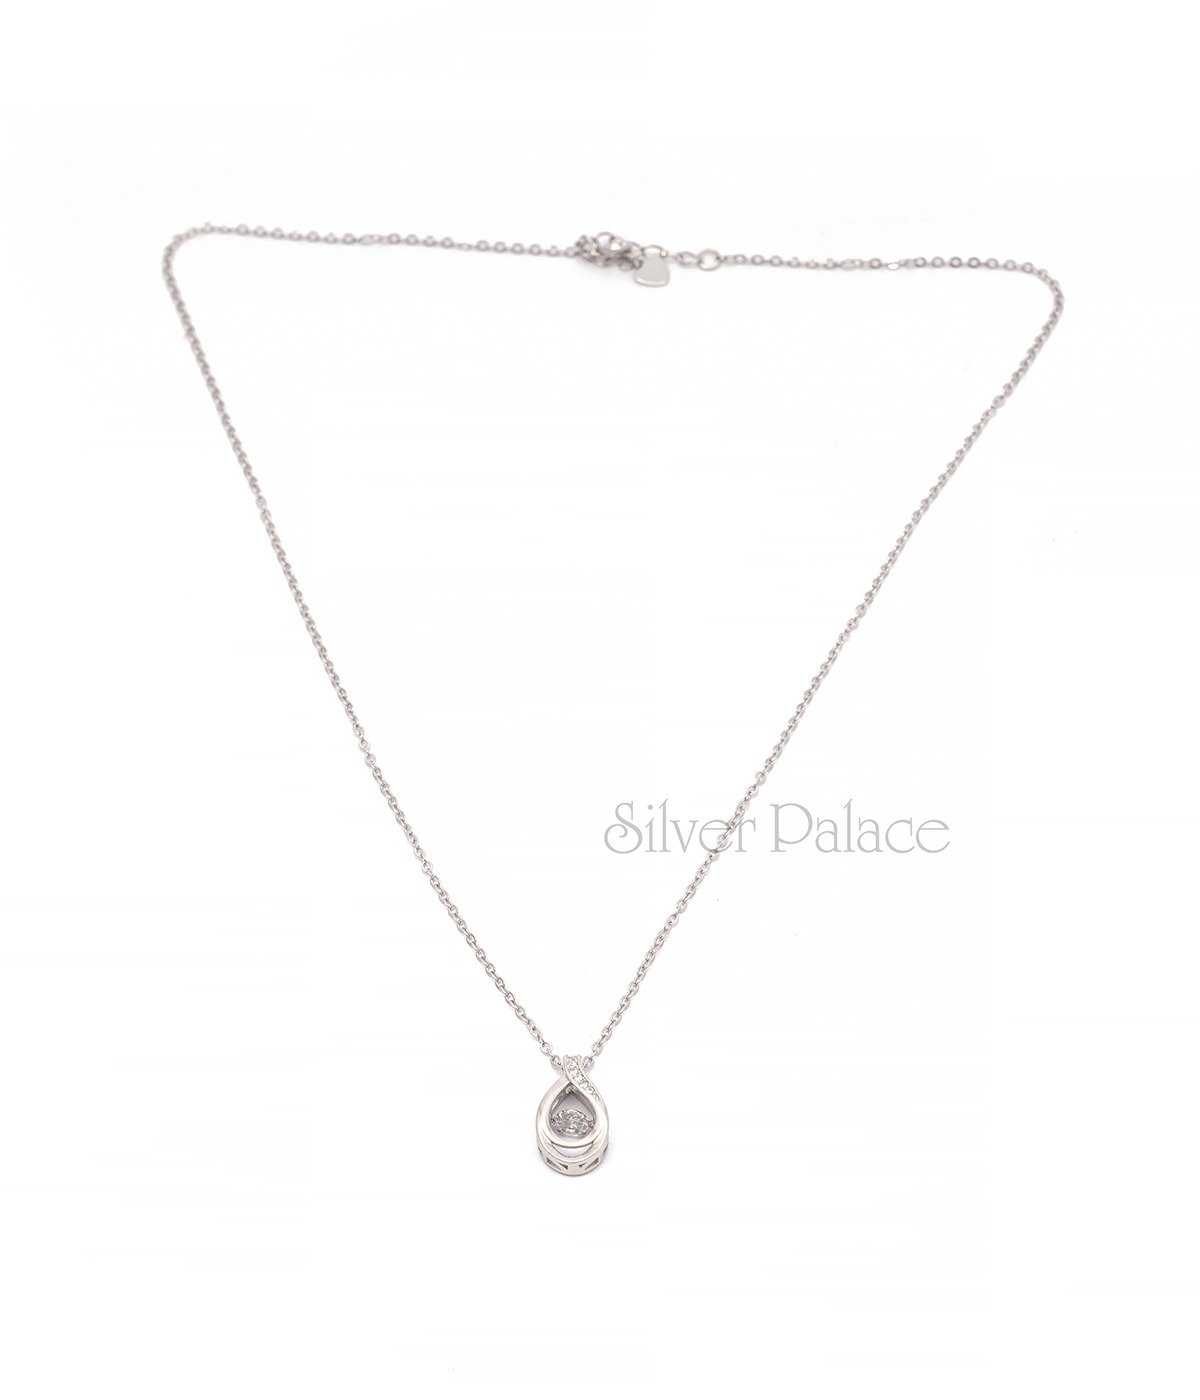 92.5 STERLING SILVER TINY DROP SHAPE WITH STONE PENDANT AND CHAIN